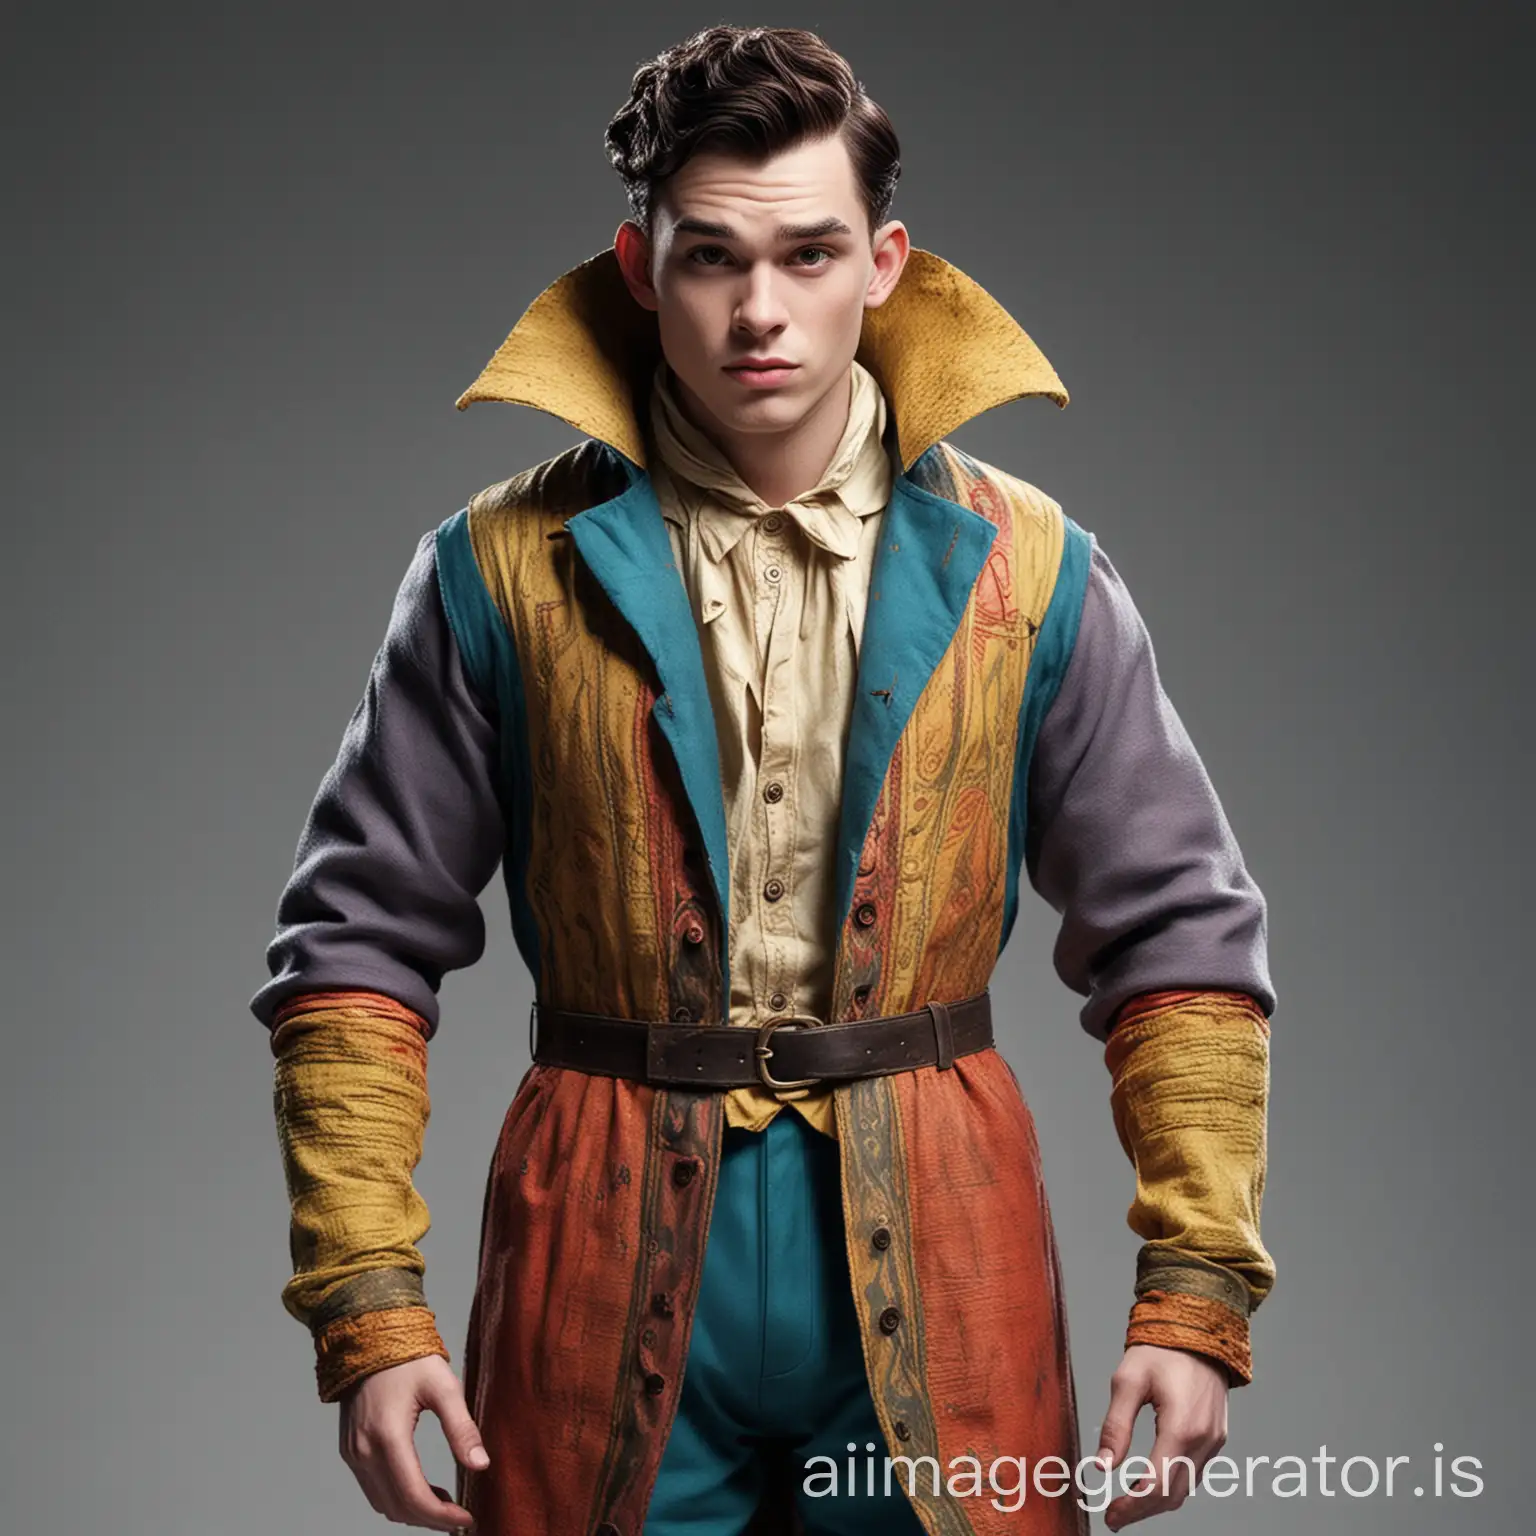 clothes design for dopey from snow white, creative, diverse colors, smooth cuts, runway material, detailed, character based, unique design, on a male model, catwalk, timeless